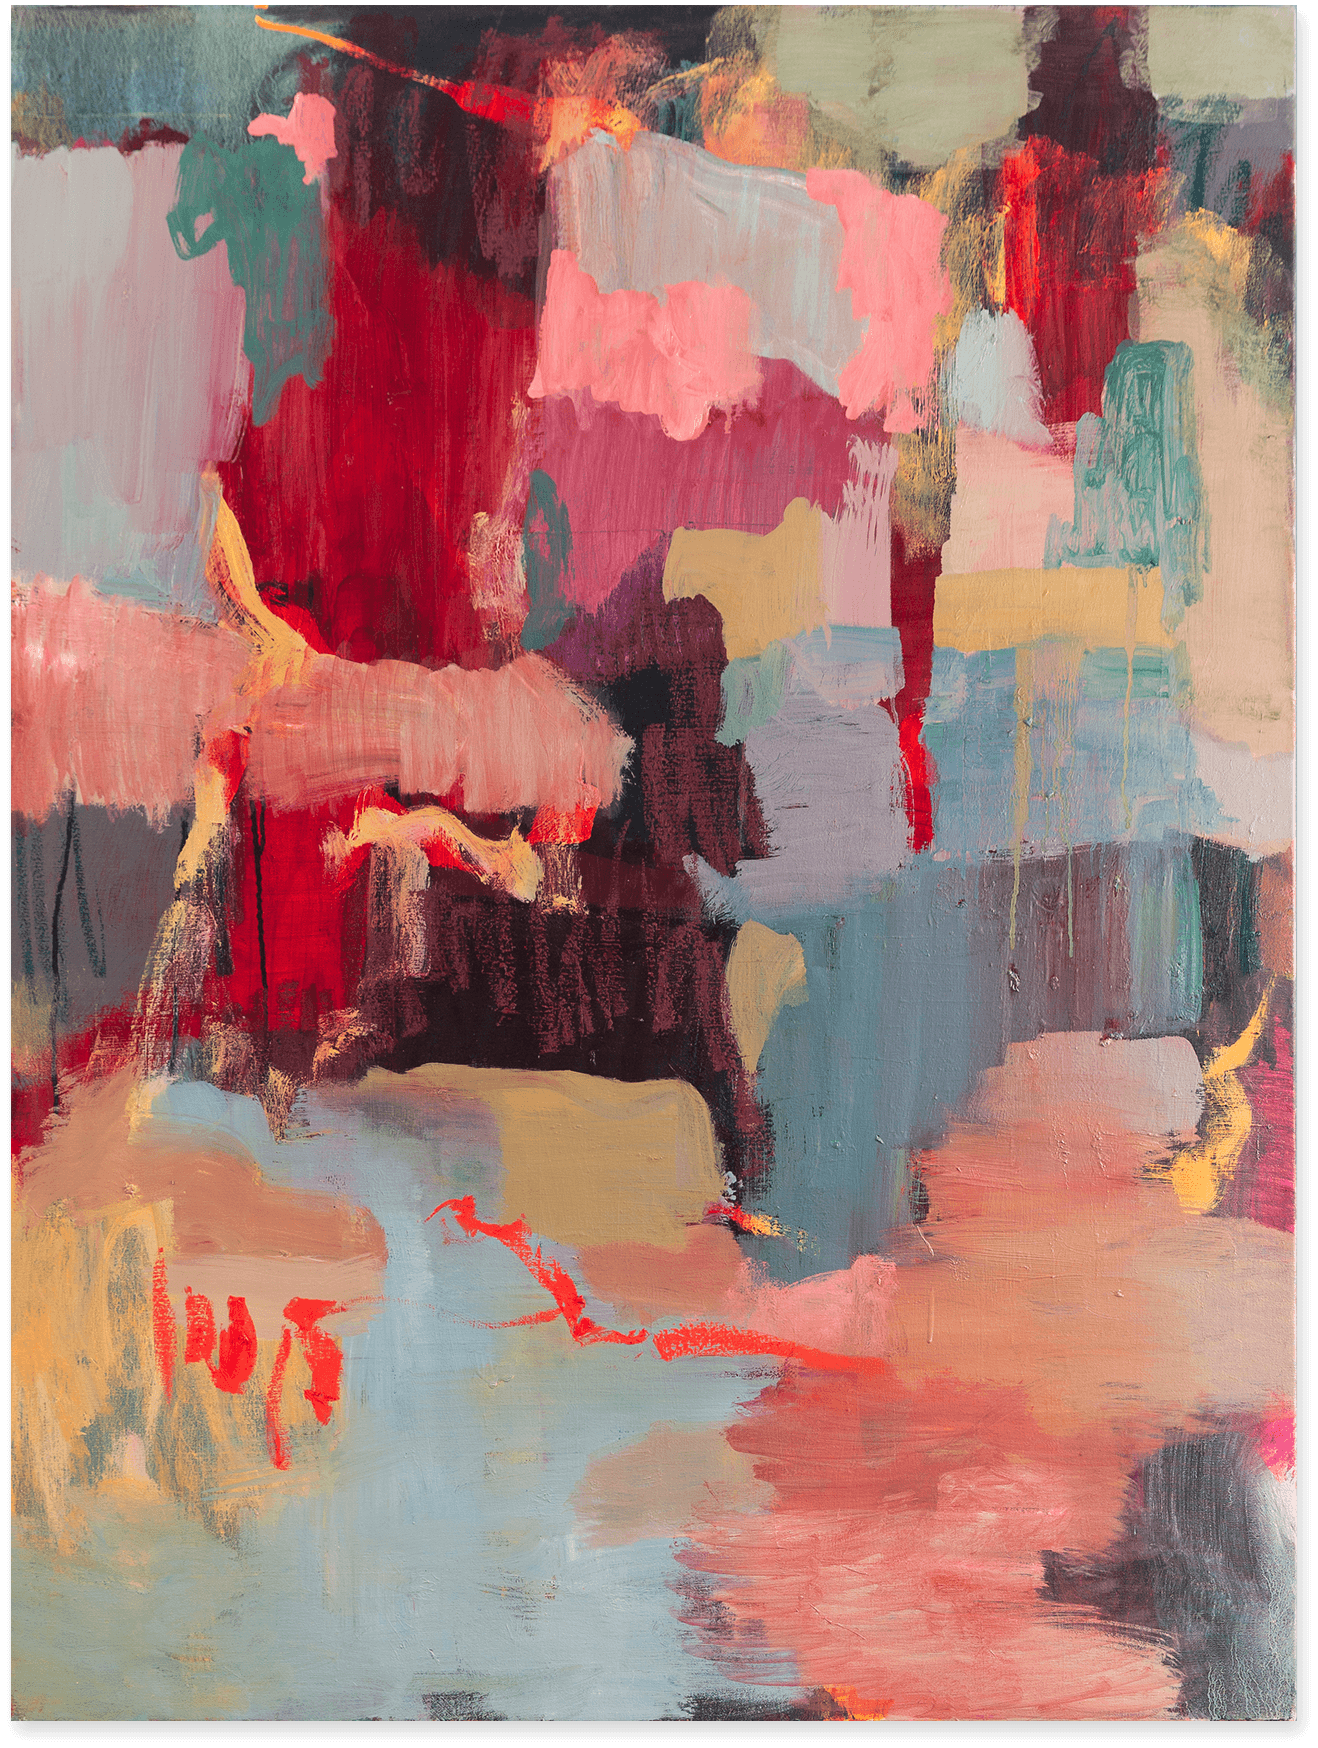 An abstract oil painting in blues, reds and pinks